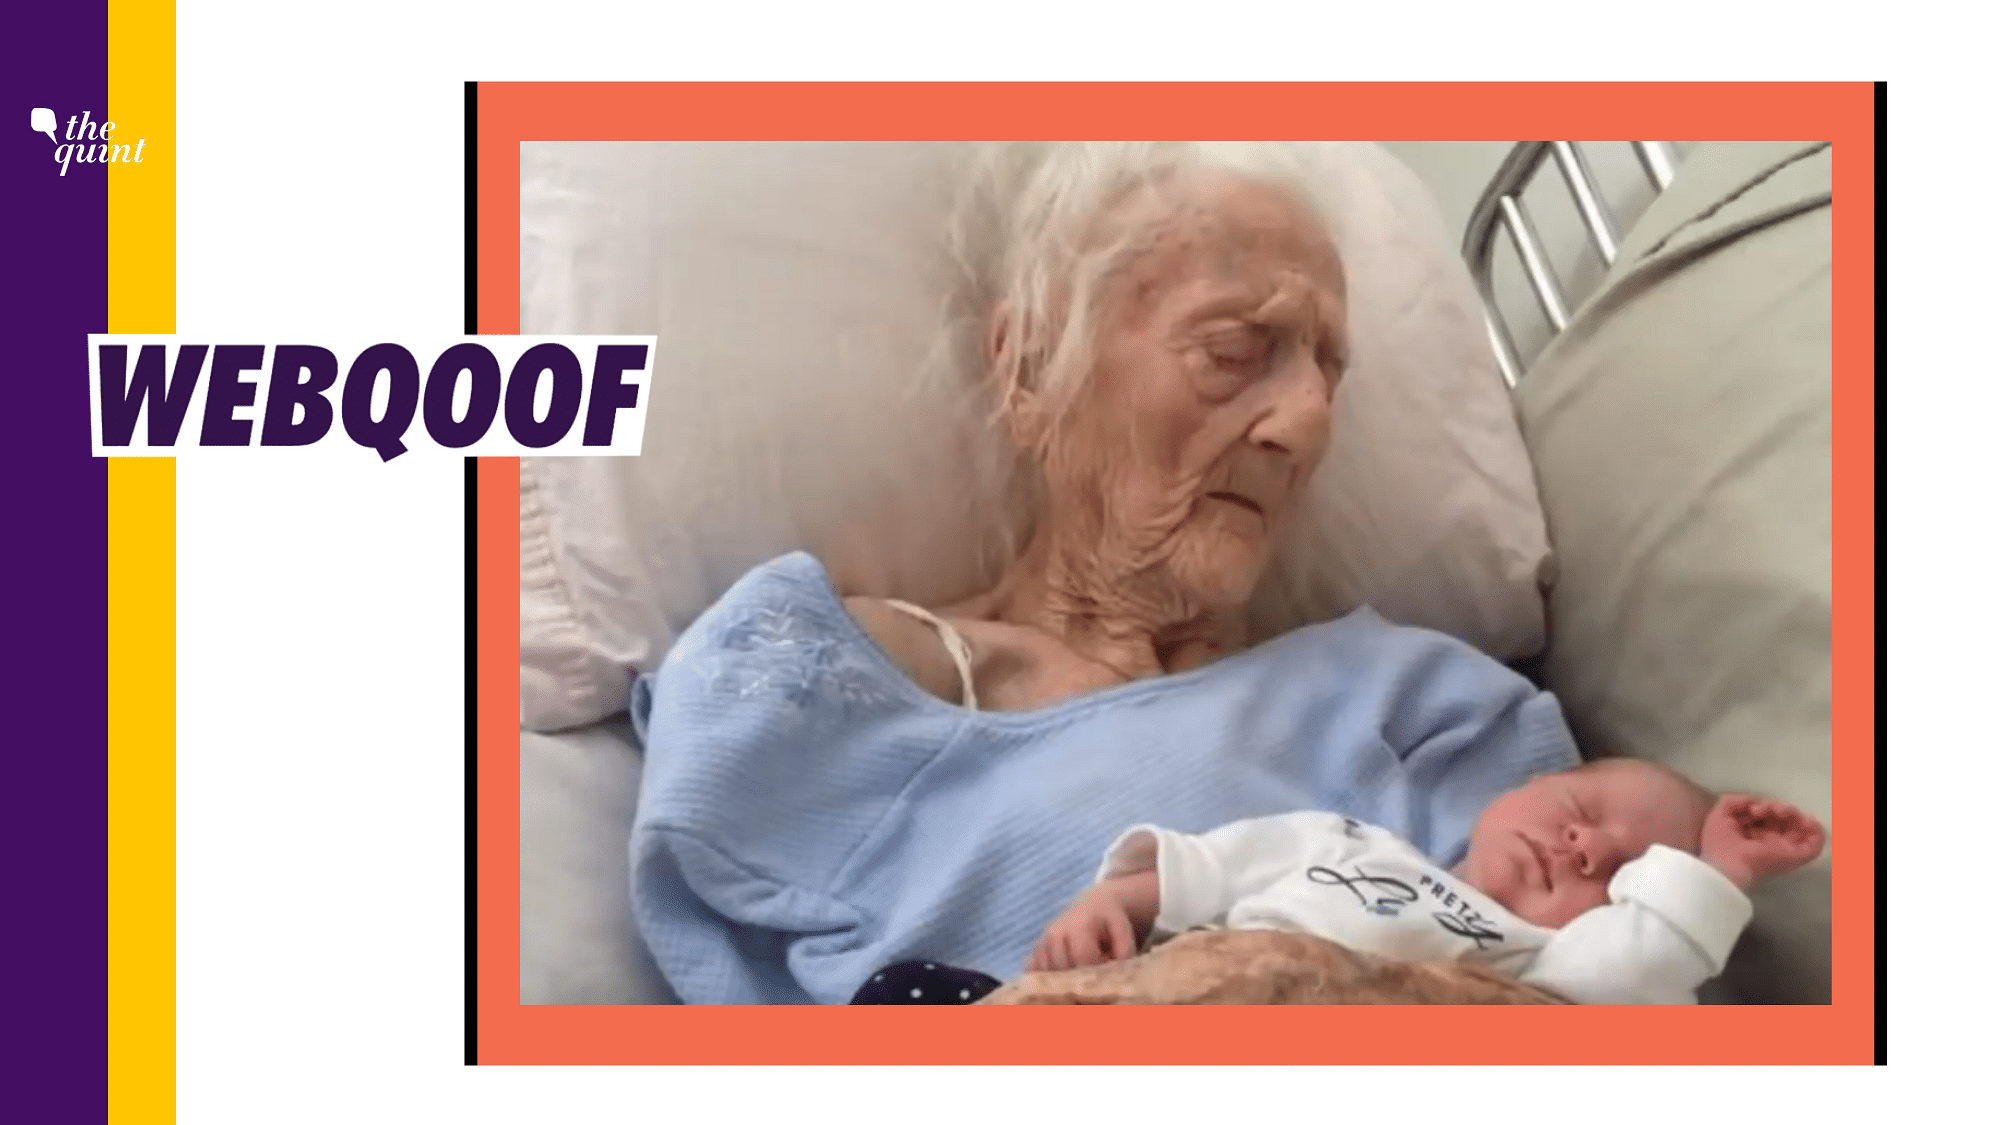 A viral video falsely claimed that the woman seen in the image gave birth to a child at 101 years.